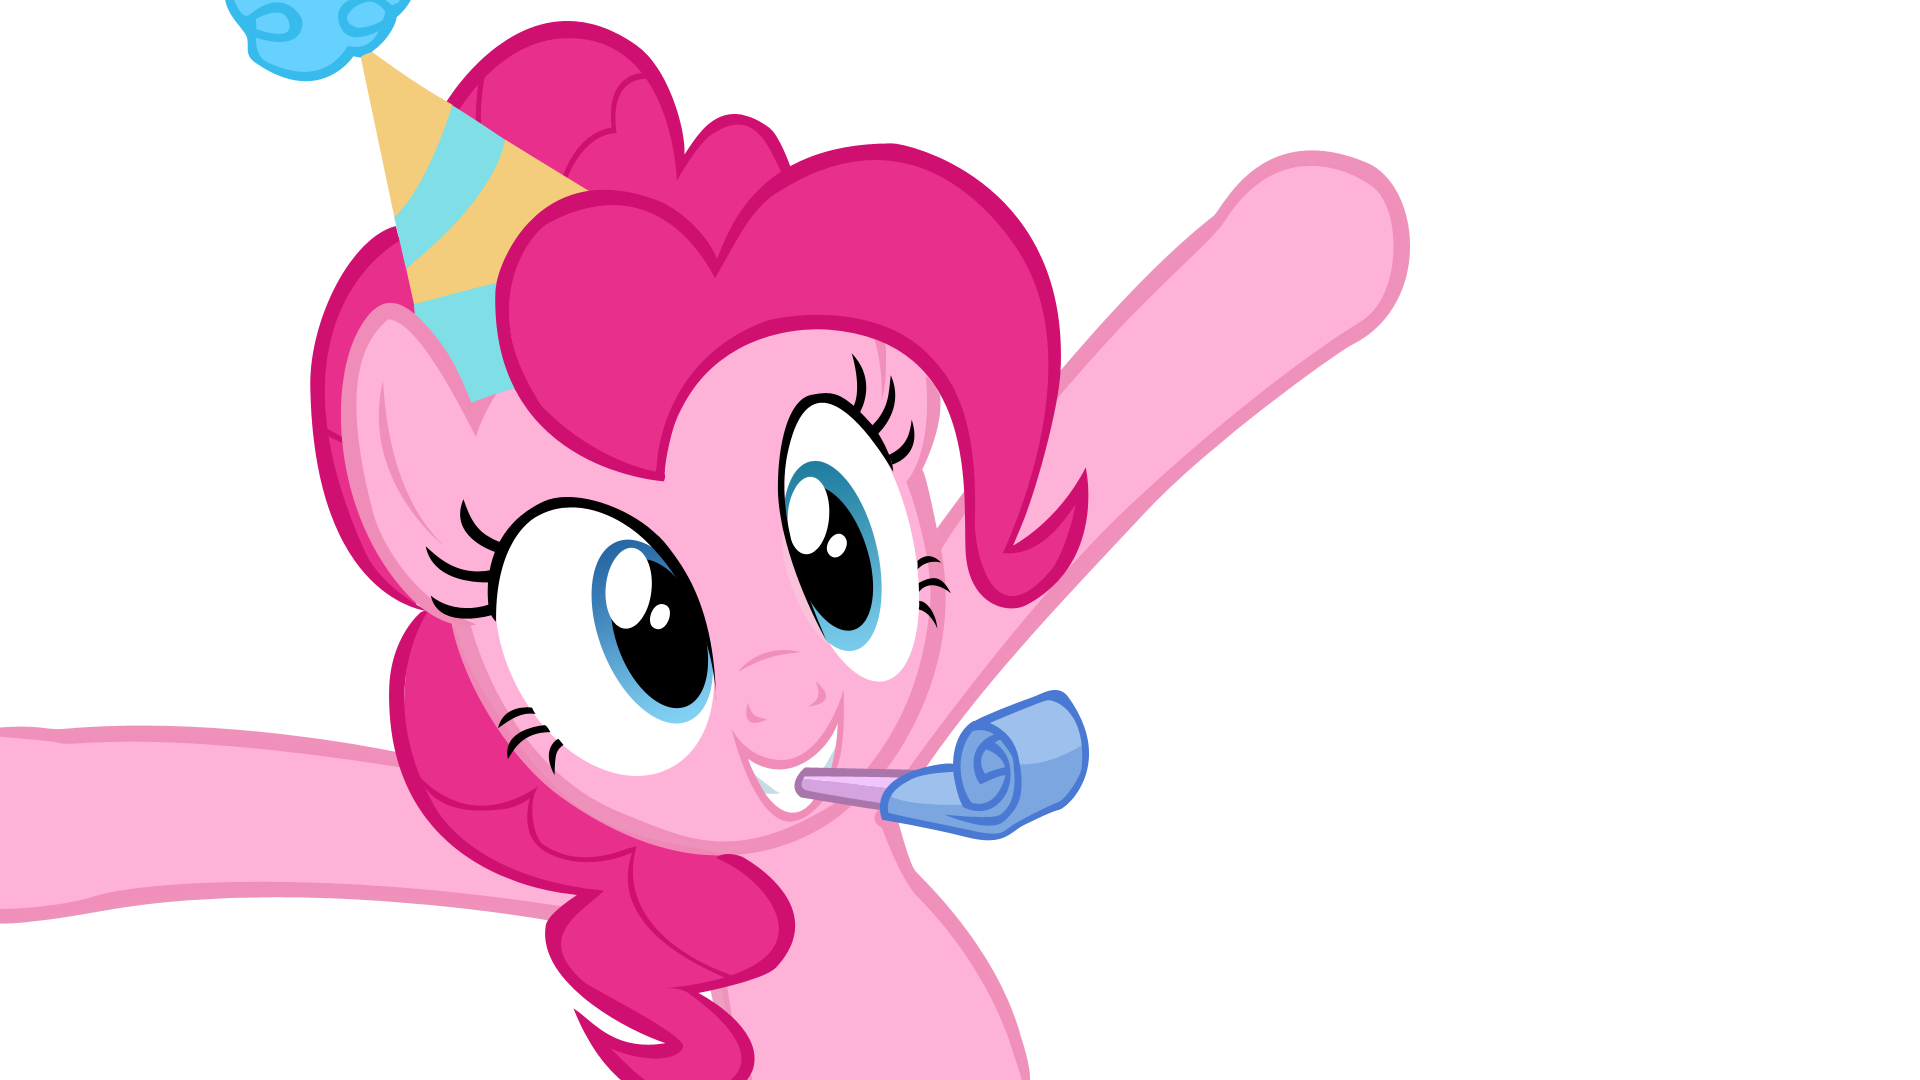 pinkie_pie___party_hat_vector_by_ctucks-d4mcxkd.png